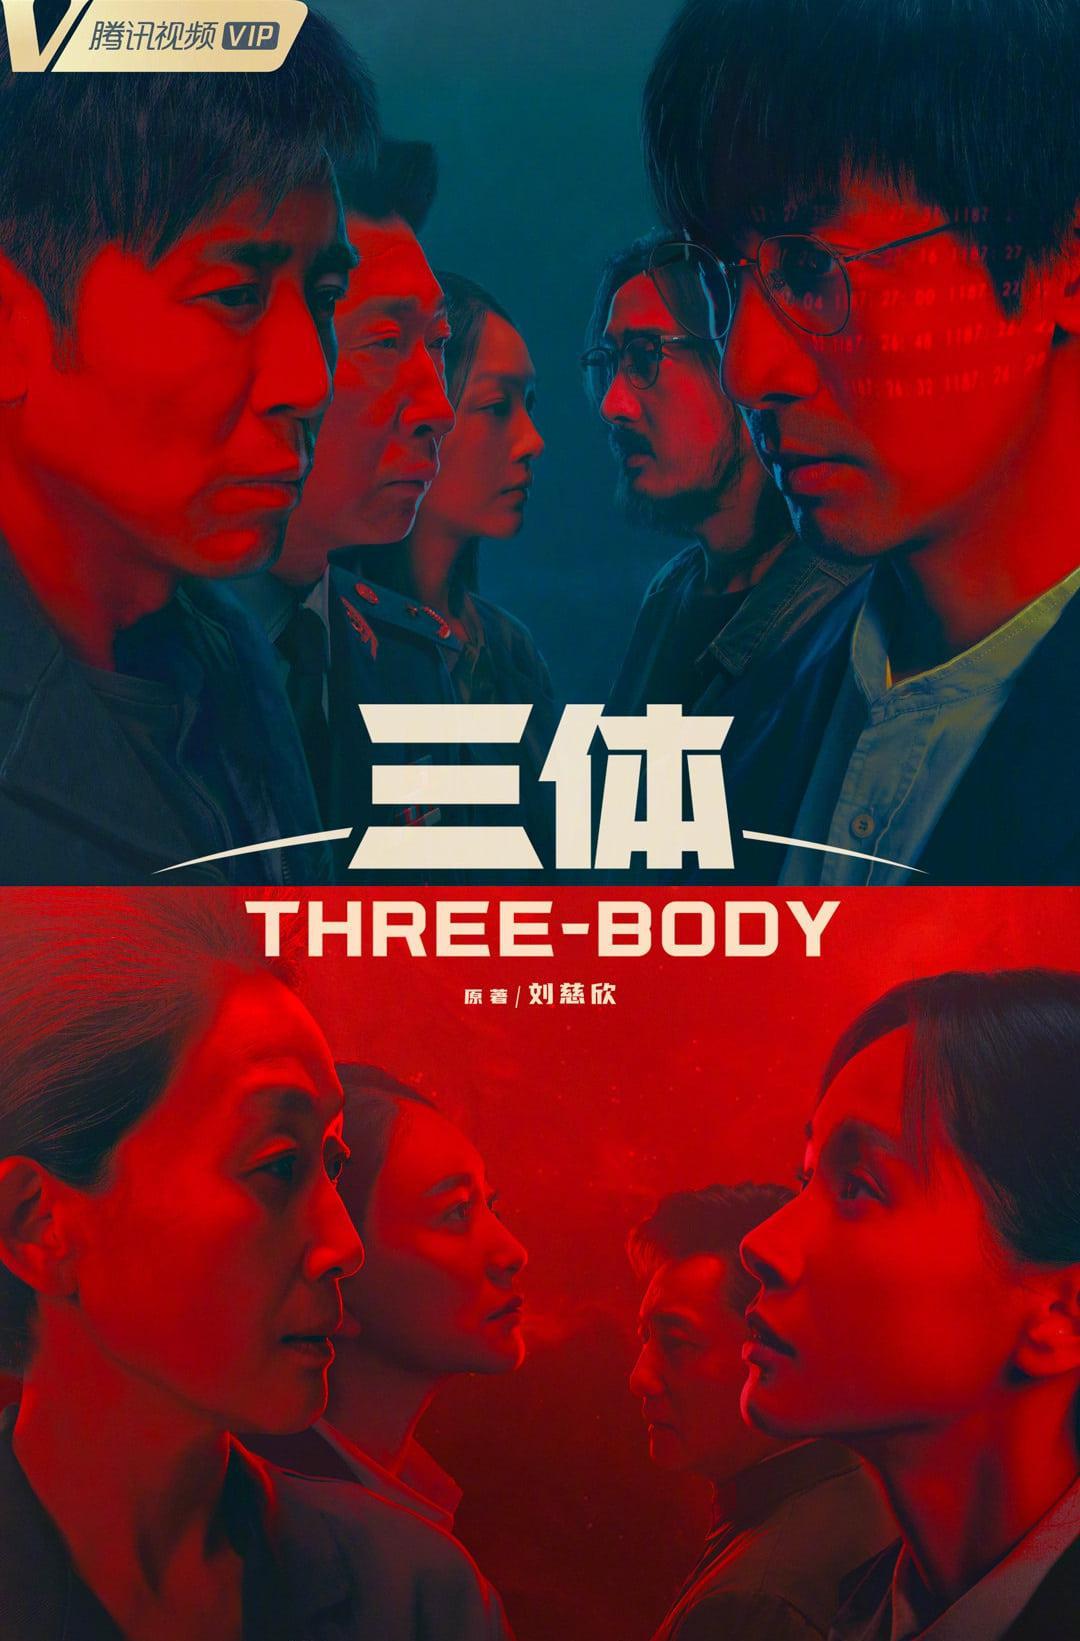 TV ratings for Three-Body (三体) in Turkey. Tencent Video TV series